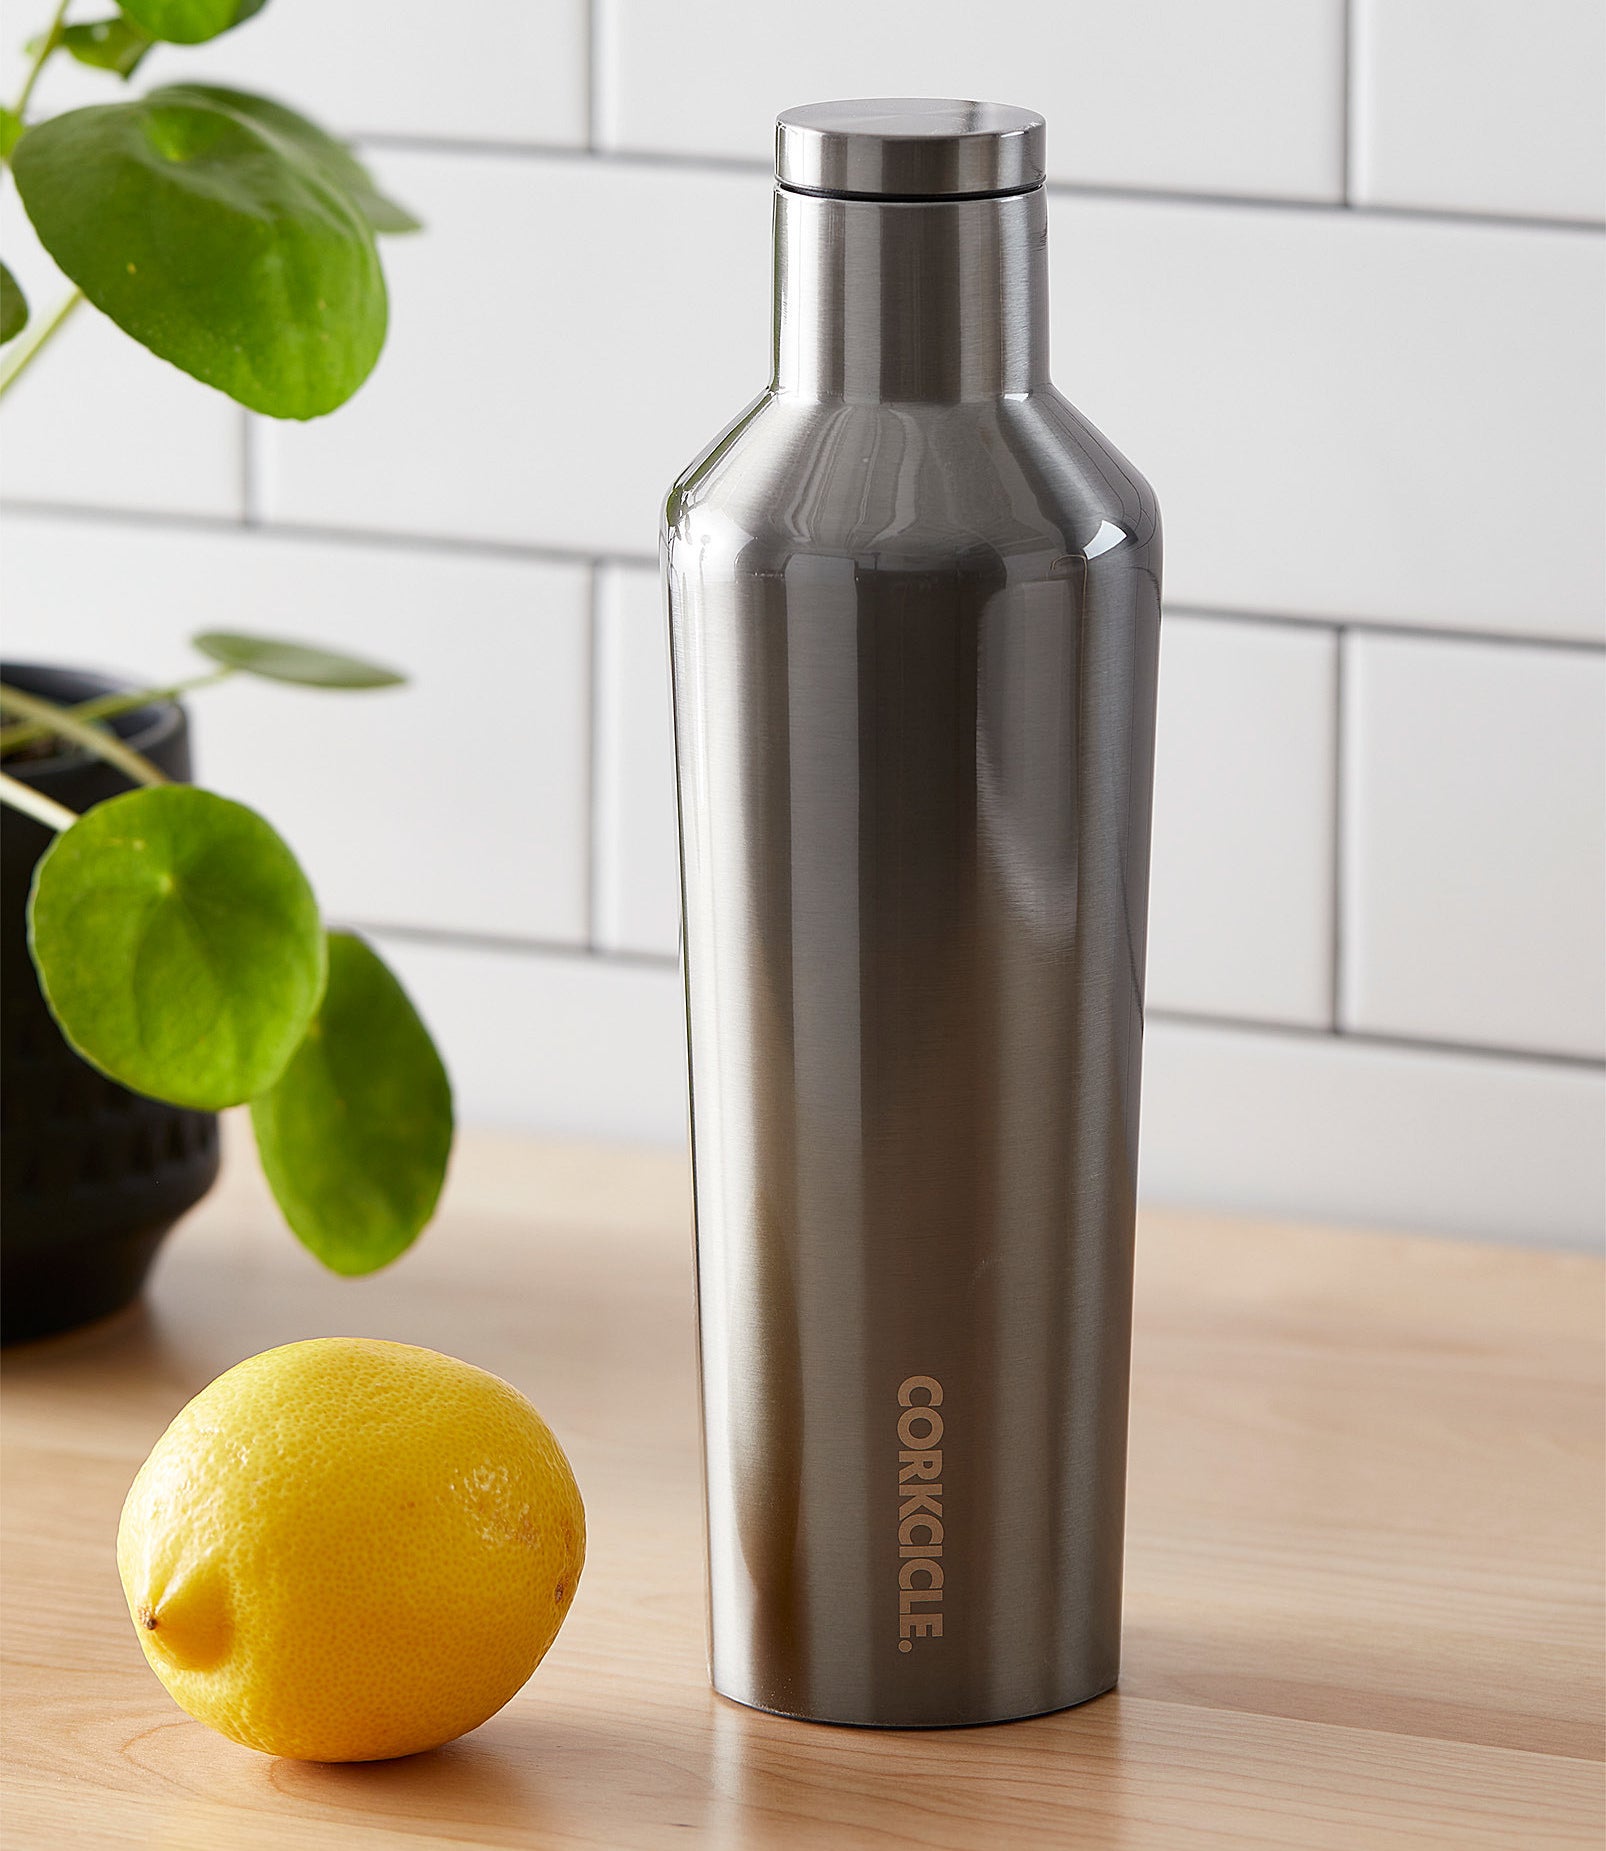 A metallic insulated bottle on a counter next to a lemon